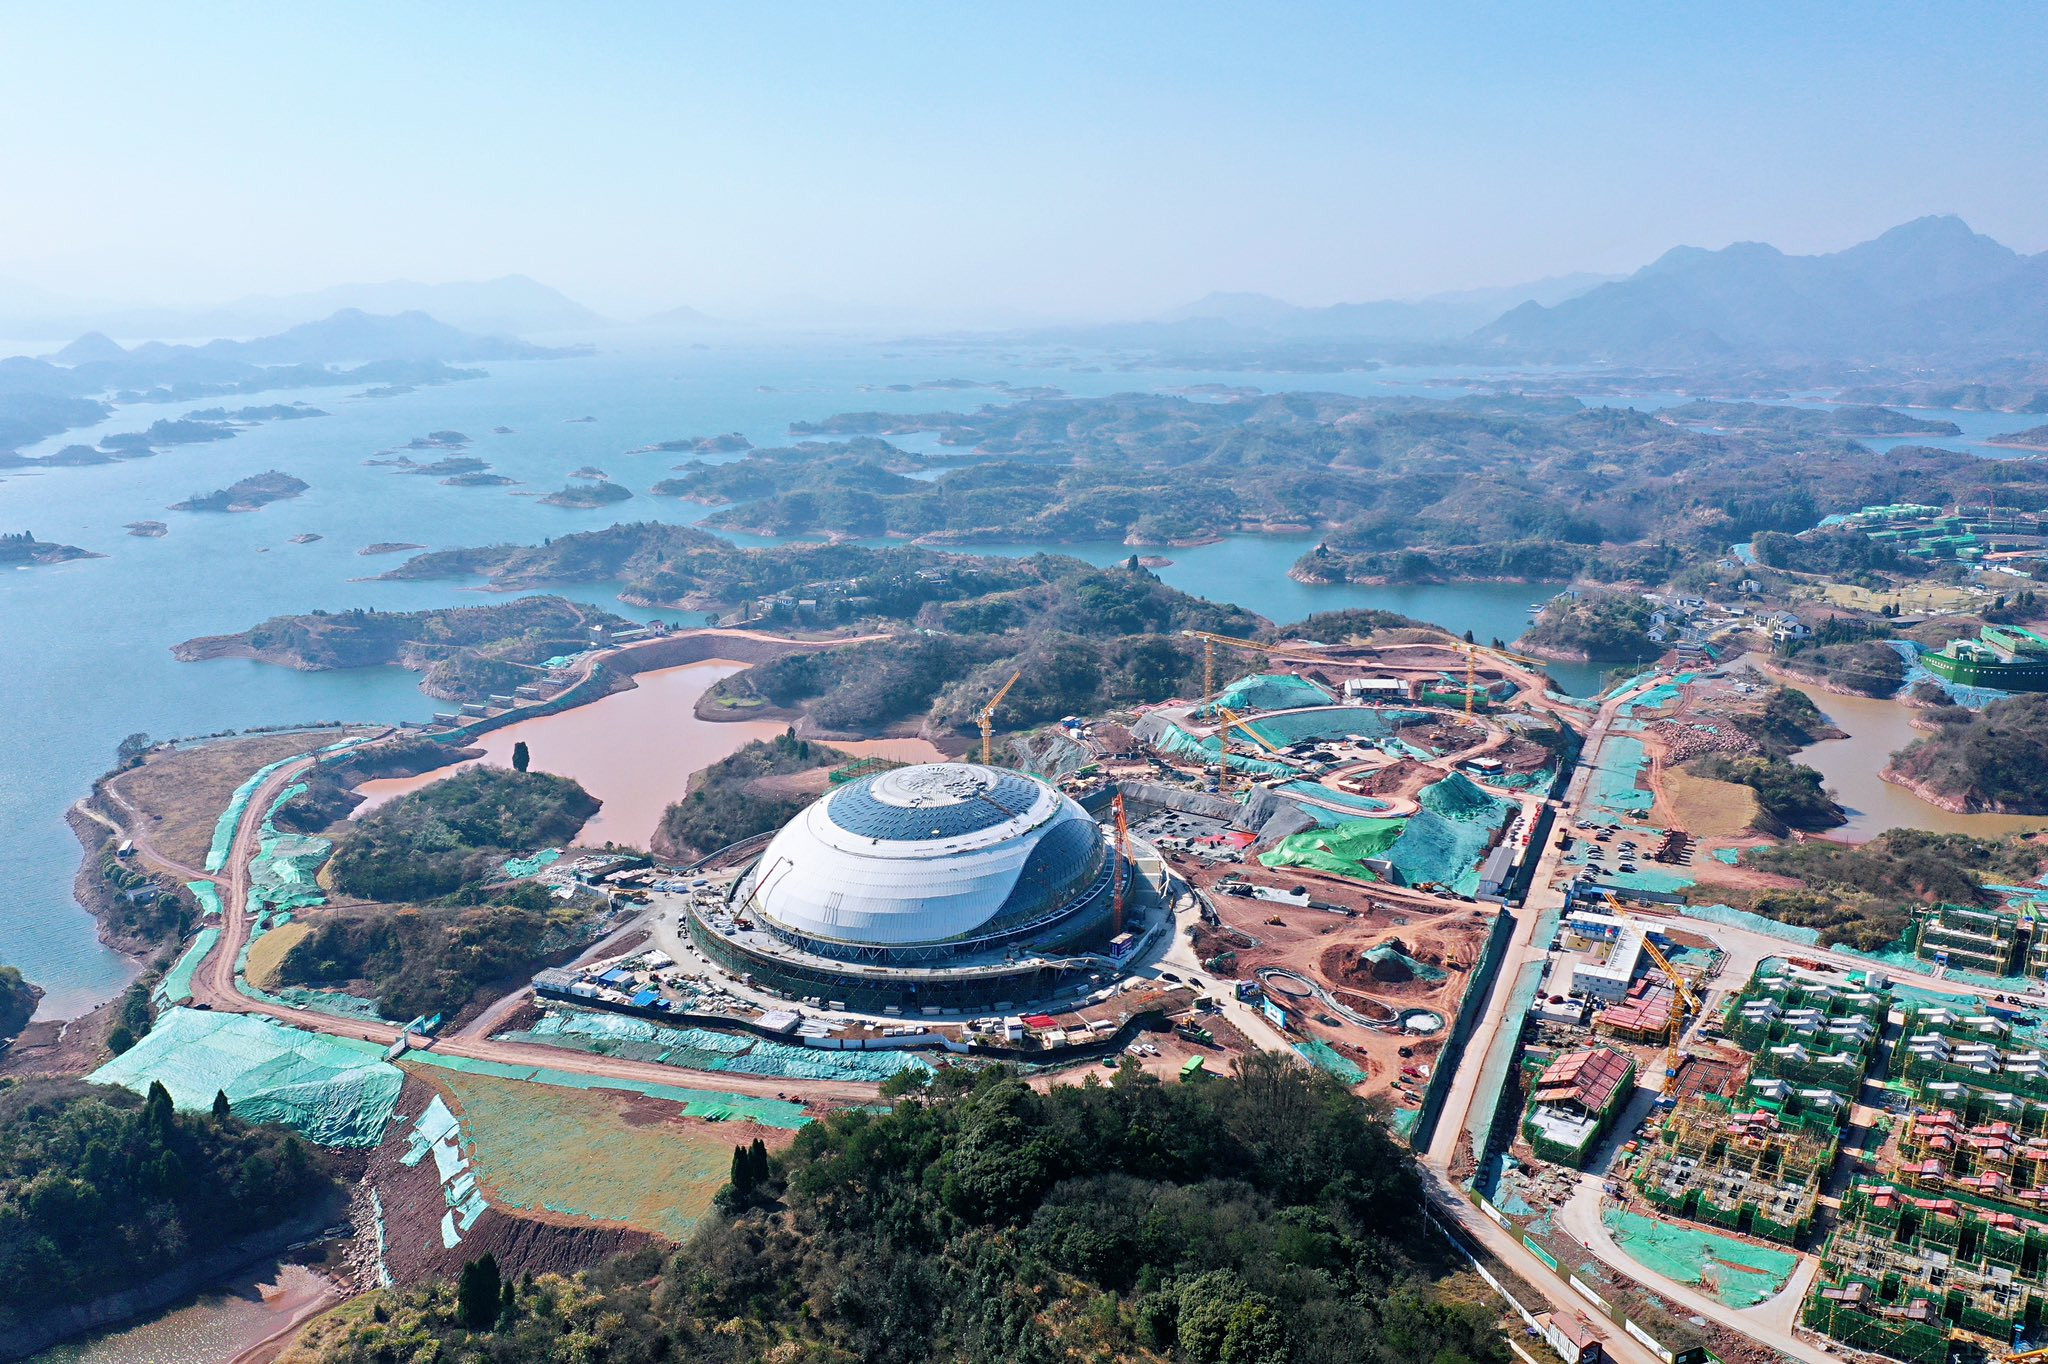 Mountain bike, road race, BMX, open water swimming and triathlon events will take place in the venue cluster around the velodrome ©Hangzhou 2022